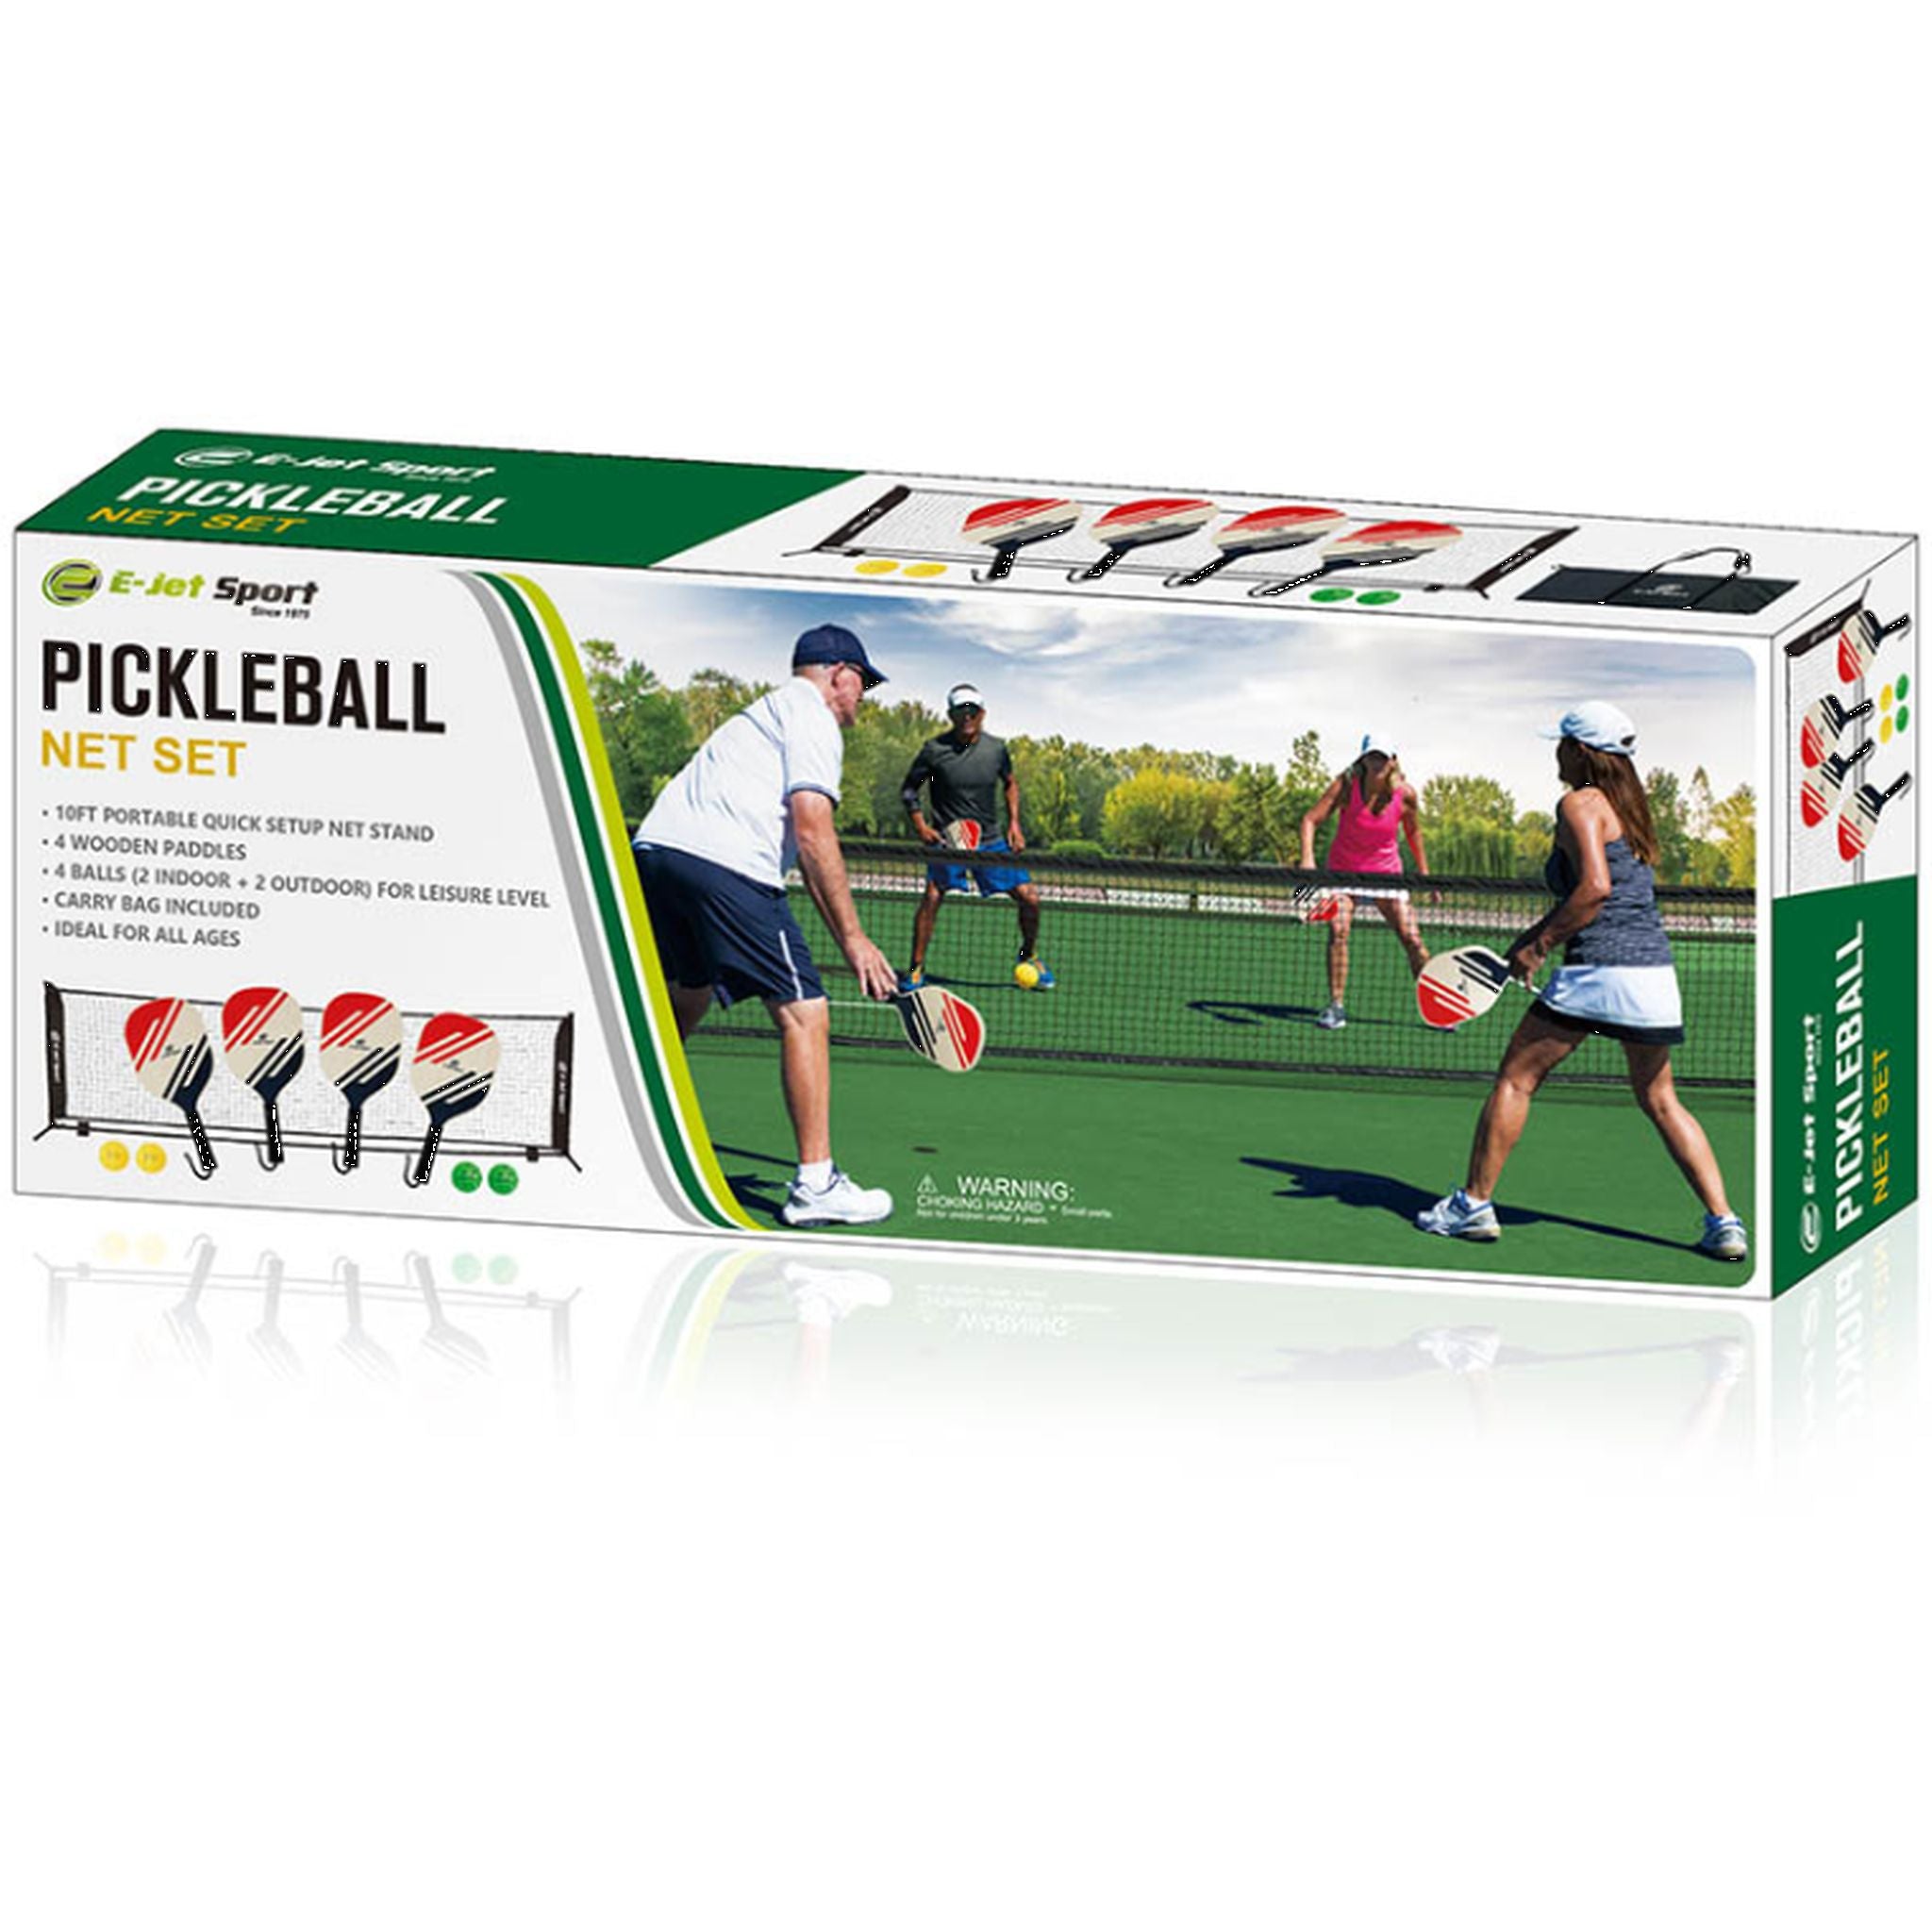 EJET Pickleball 4 Player Set with Net